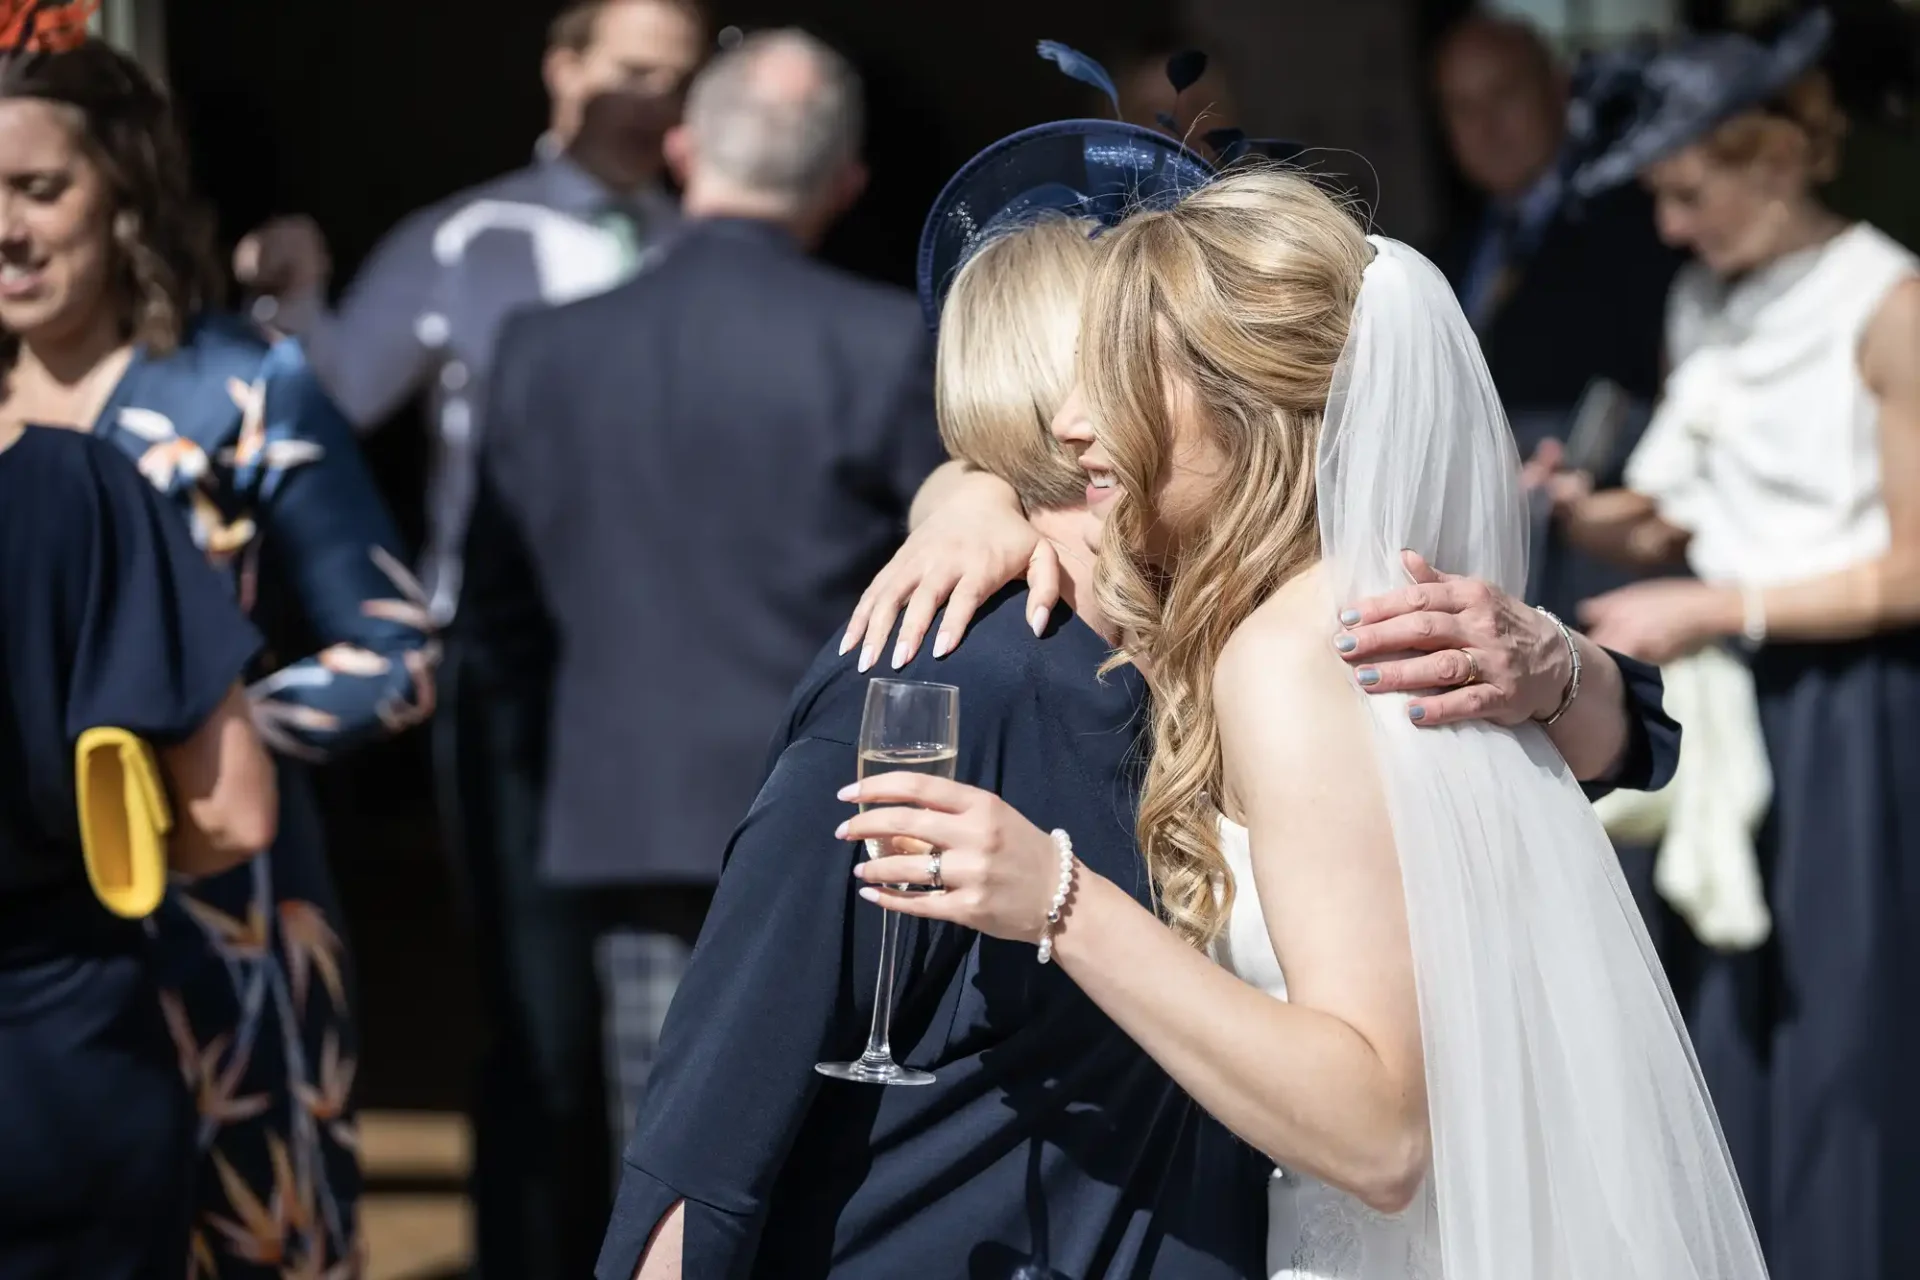 A bride in a white dress and veil embracing a woman in a navy dress, both smiling, at a sunny outdoor wedding ceremony.